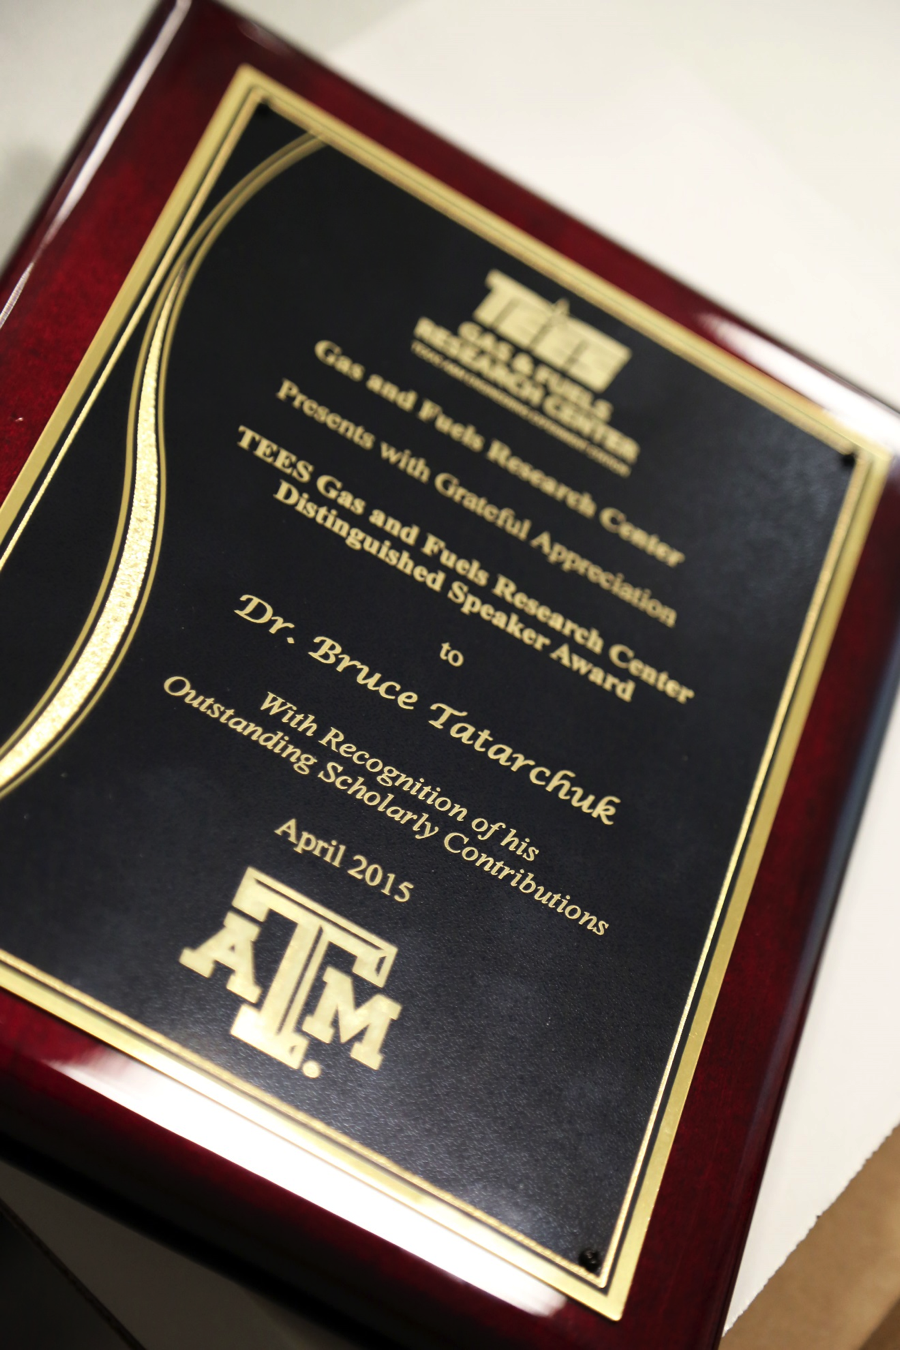 TEES Gas and Fuels Research Center Distinguished Speaker Award plaque to Dr. Bruce Tartarchuk